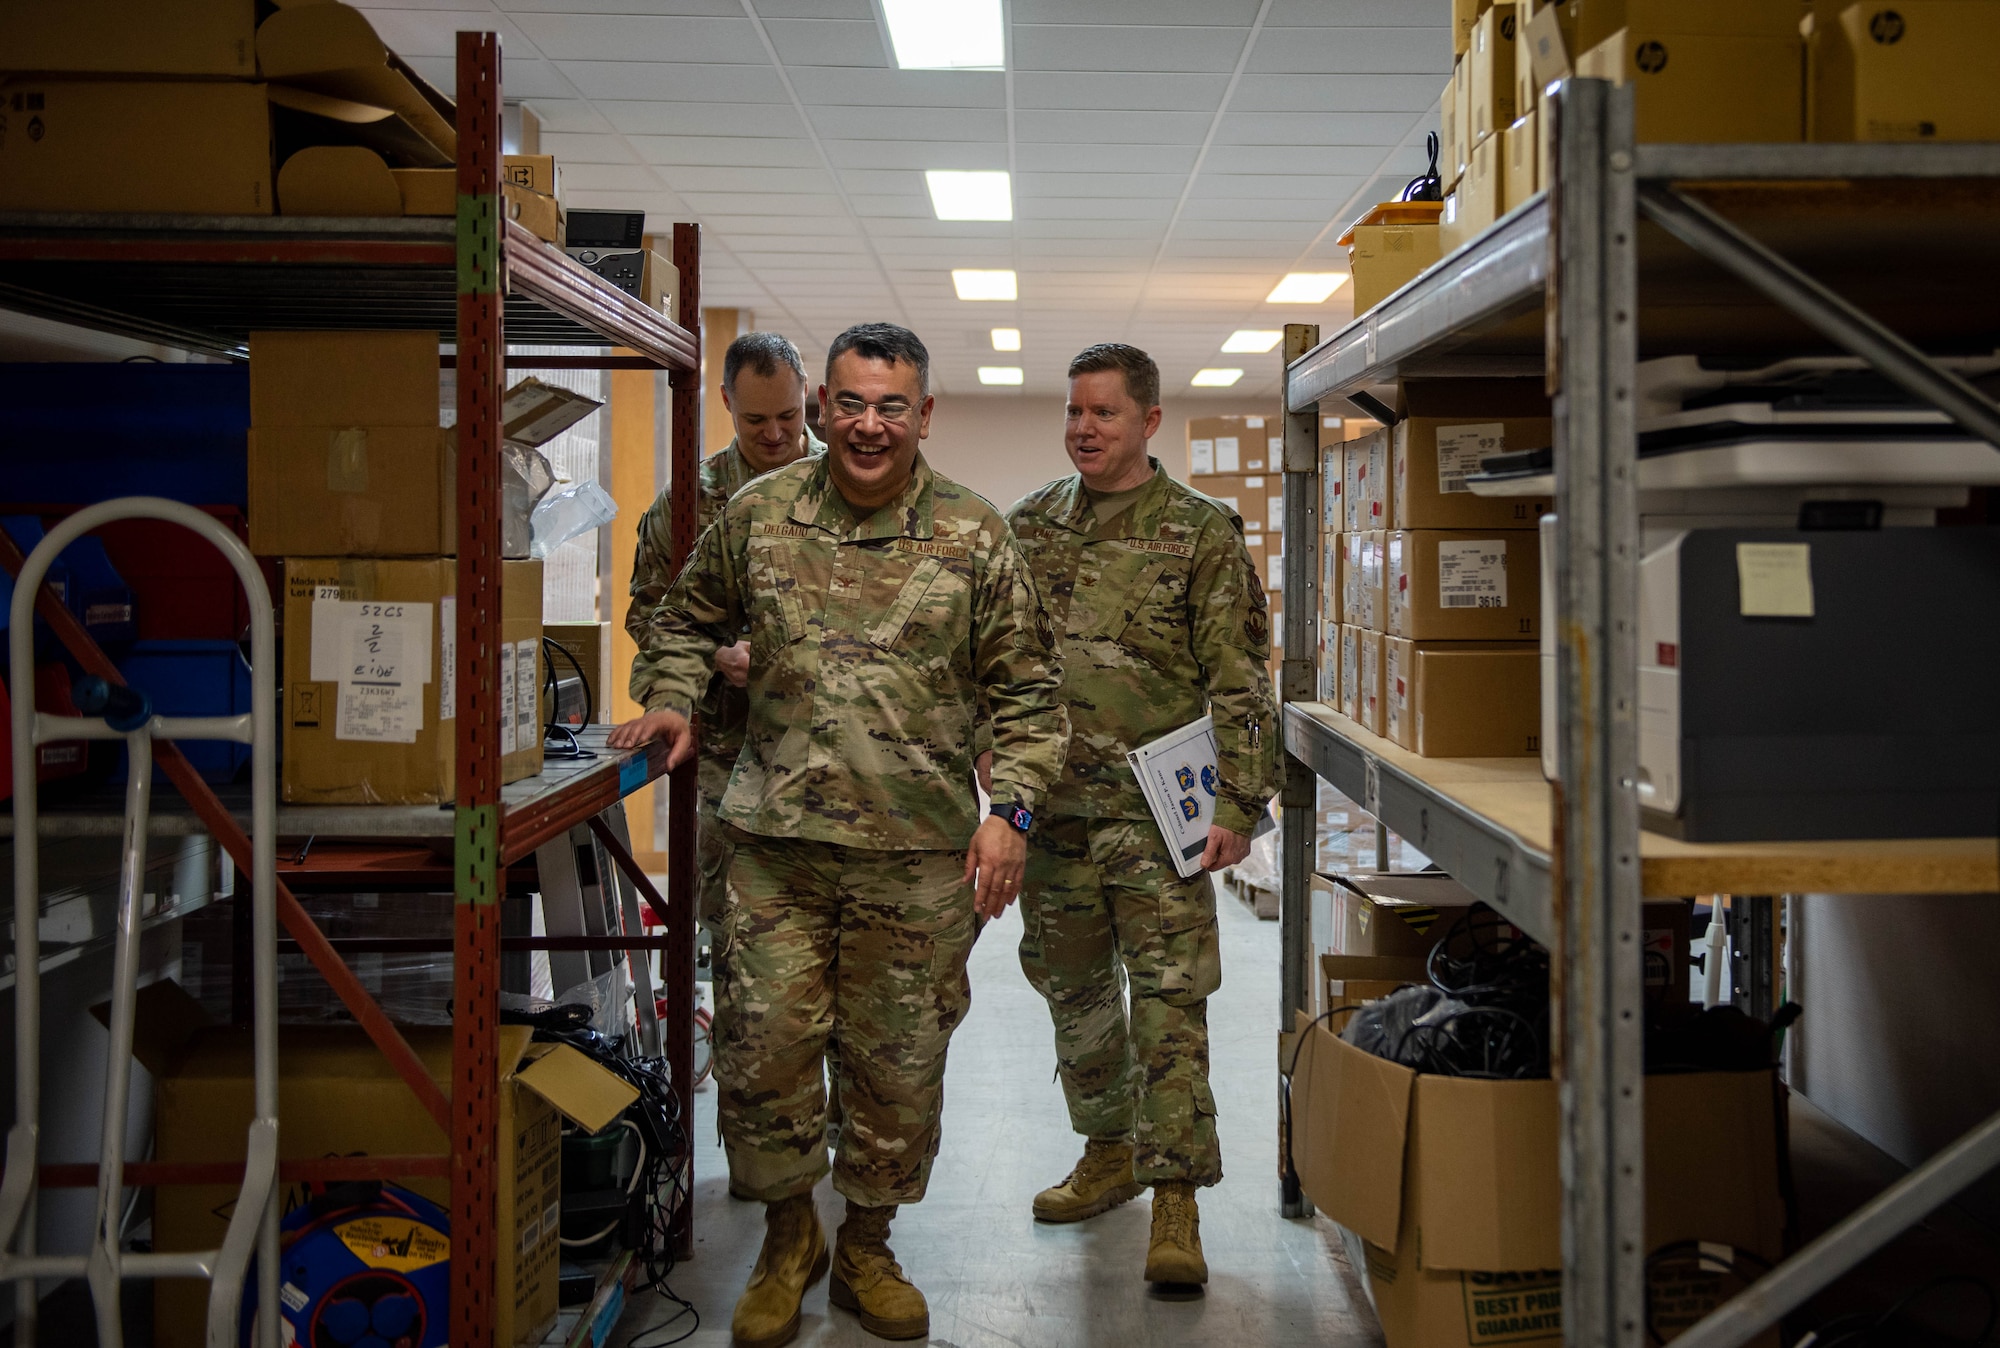 U.S. Air Force Col. Oscar Delgado, U.S. Air Forces in Europe - Air Forces in Africa A6 director, Col. Jason Kane, USAFE-AFAFRICA A6 deputy director and Lt. Col. Thomas Heisel, 52nd Communications Squadron commander, view a storage facility during a base visit at Spangdahlem Air Base, Germany, Jan. 24, 2024.